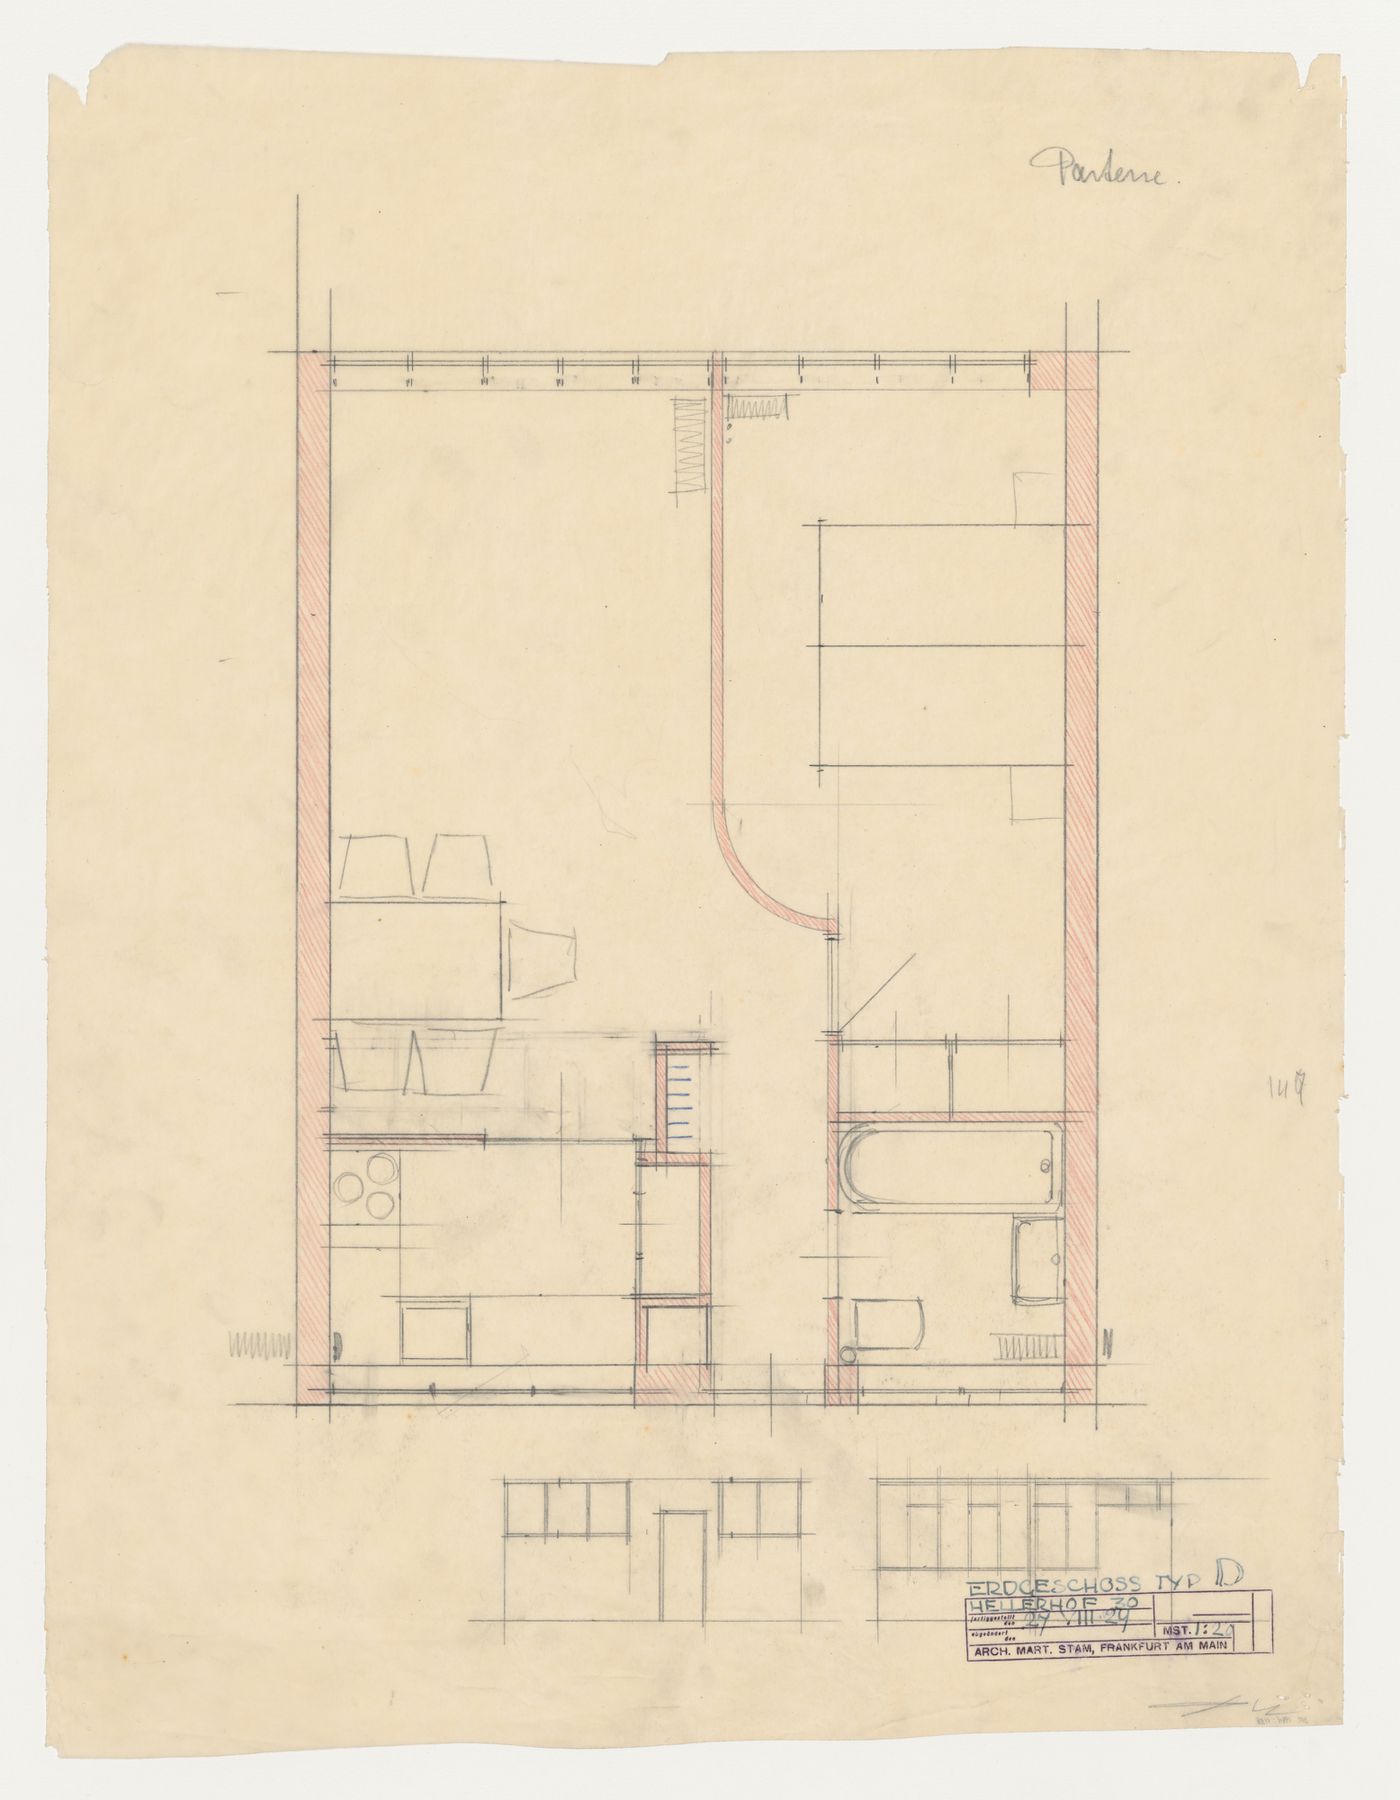 Ground floor plan and elevations for a type D housing unit, Hellerhof Housing Estate, Frankfurt am Main, Germany